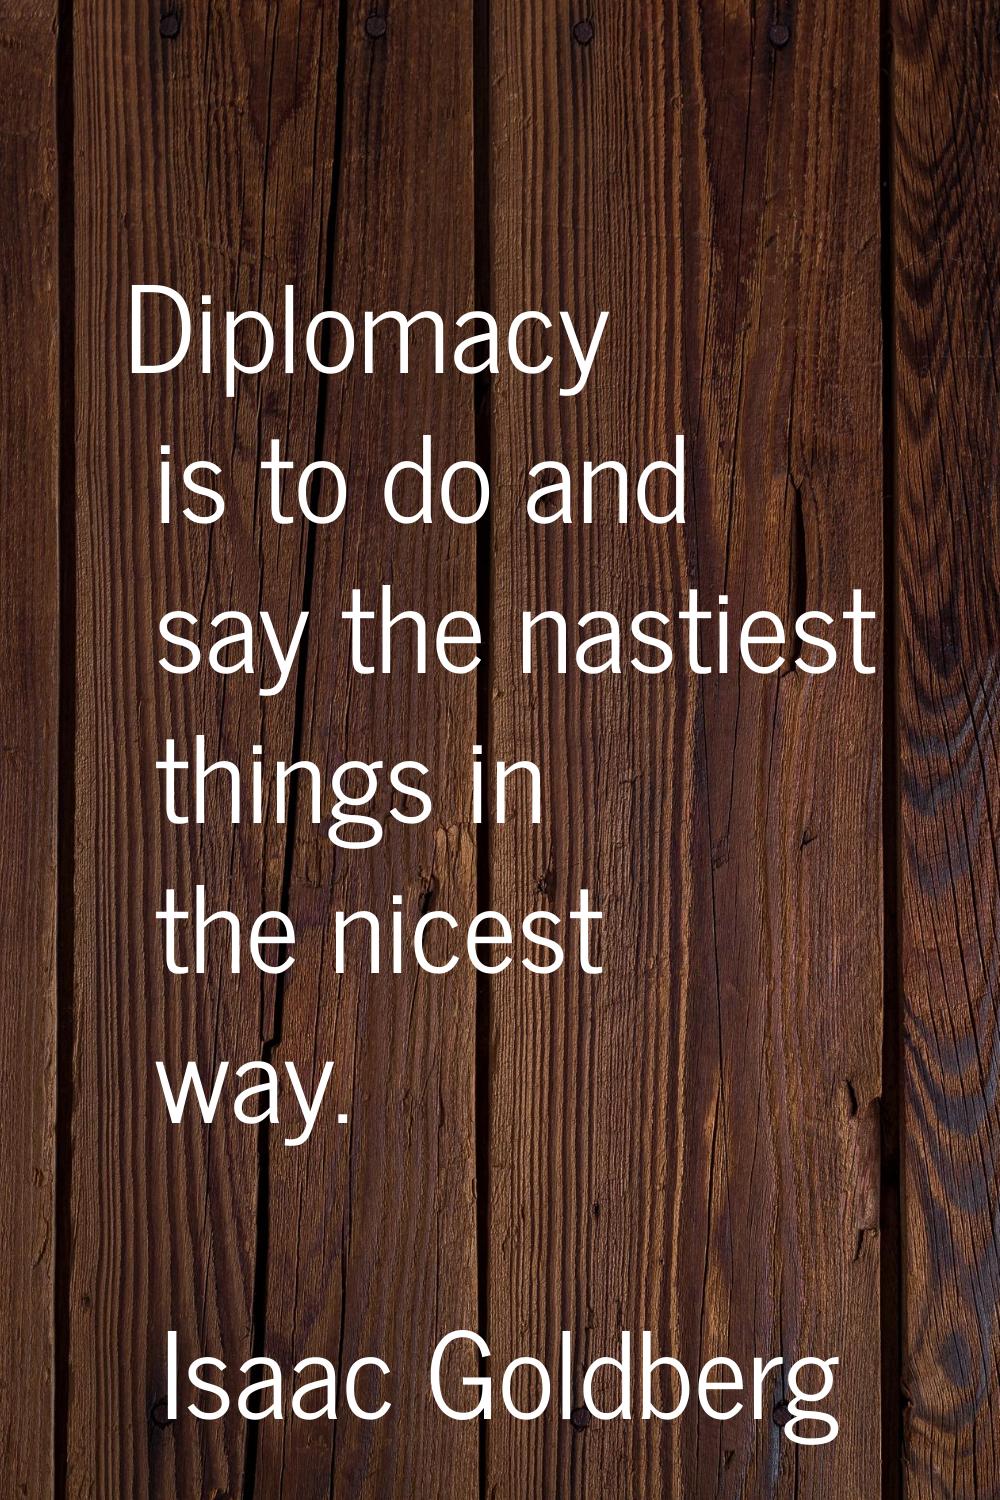 Diplomacy is to do and say the nastiest things in the nicest way.